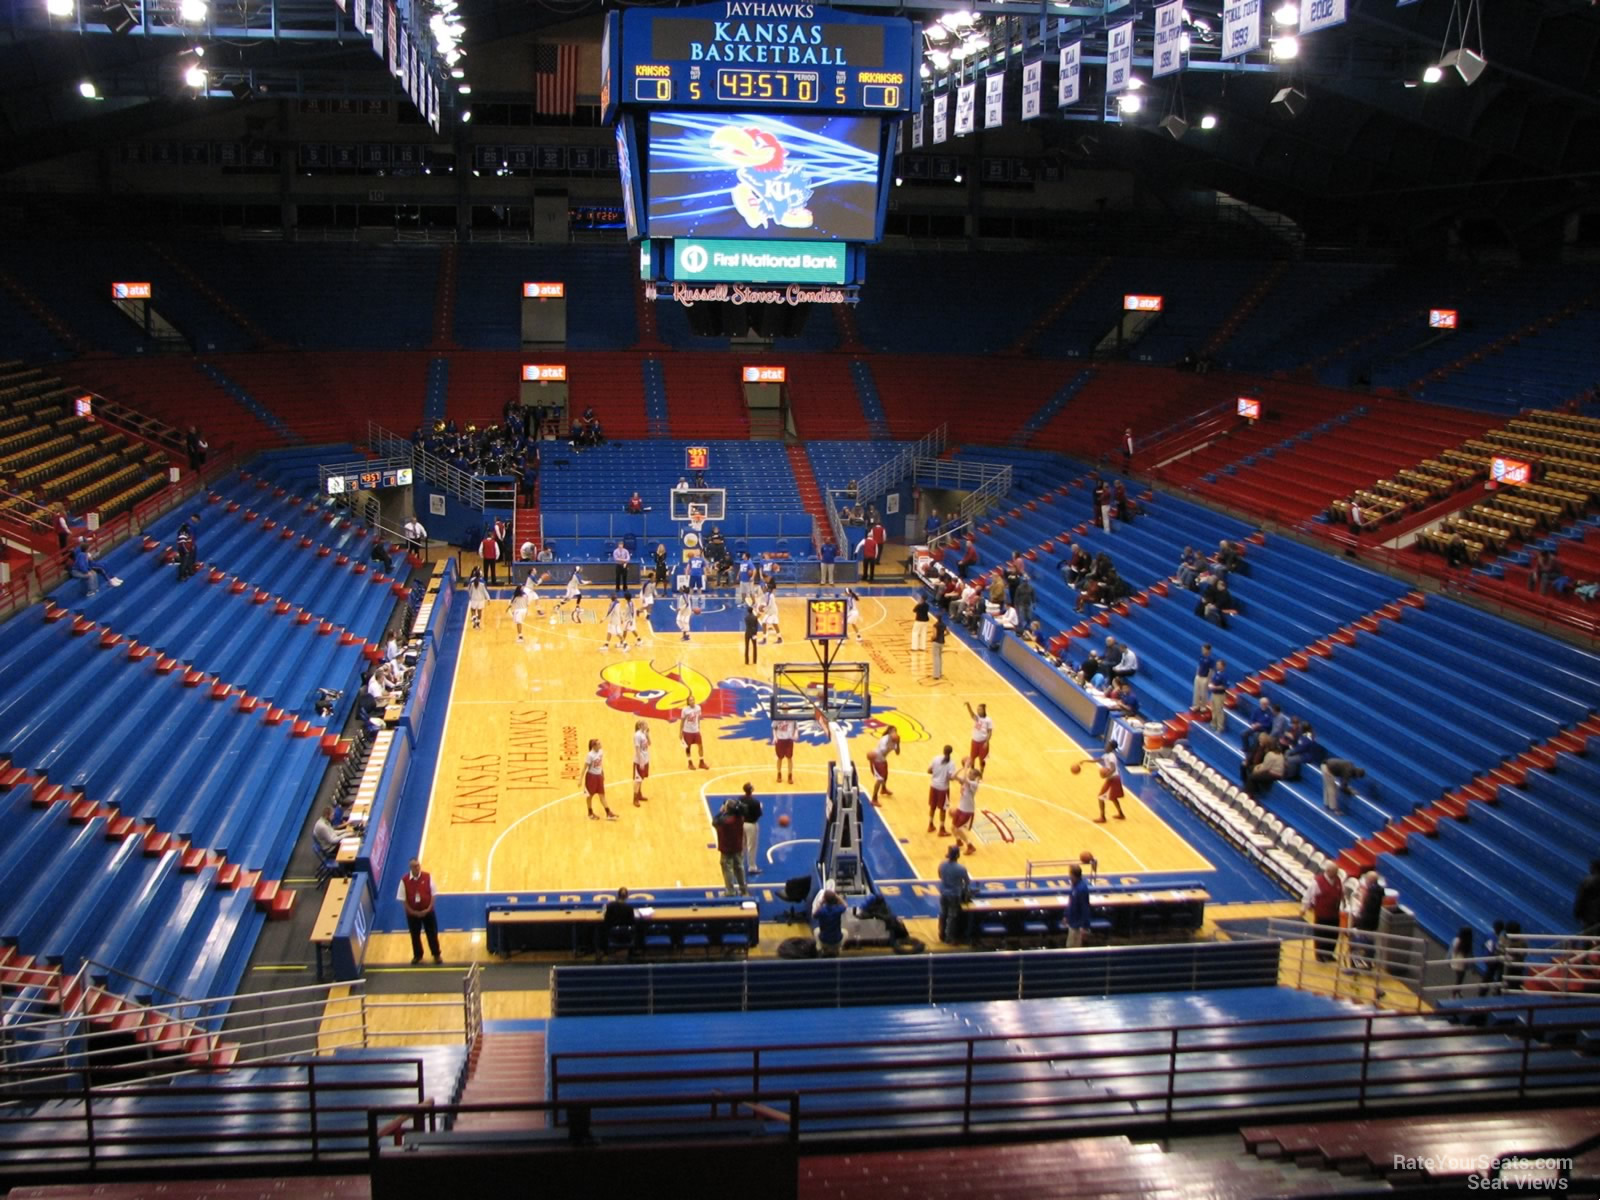 section 1, row 18 seat view  - allen fieldhouse